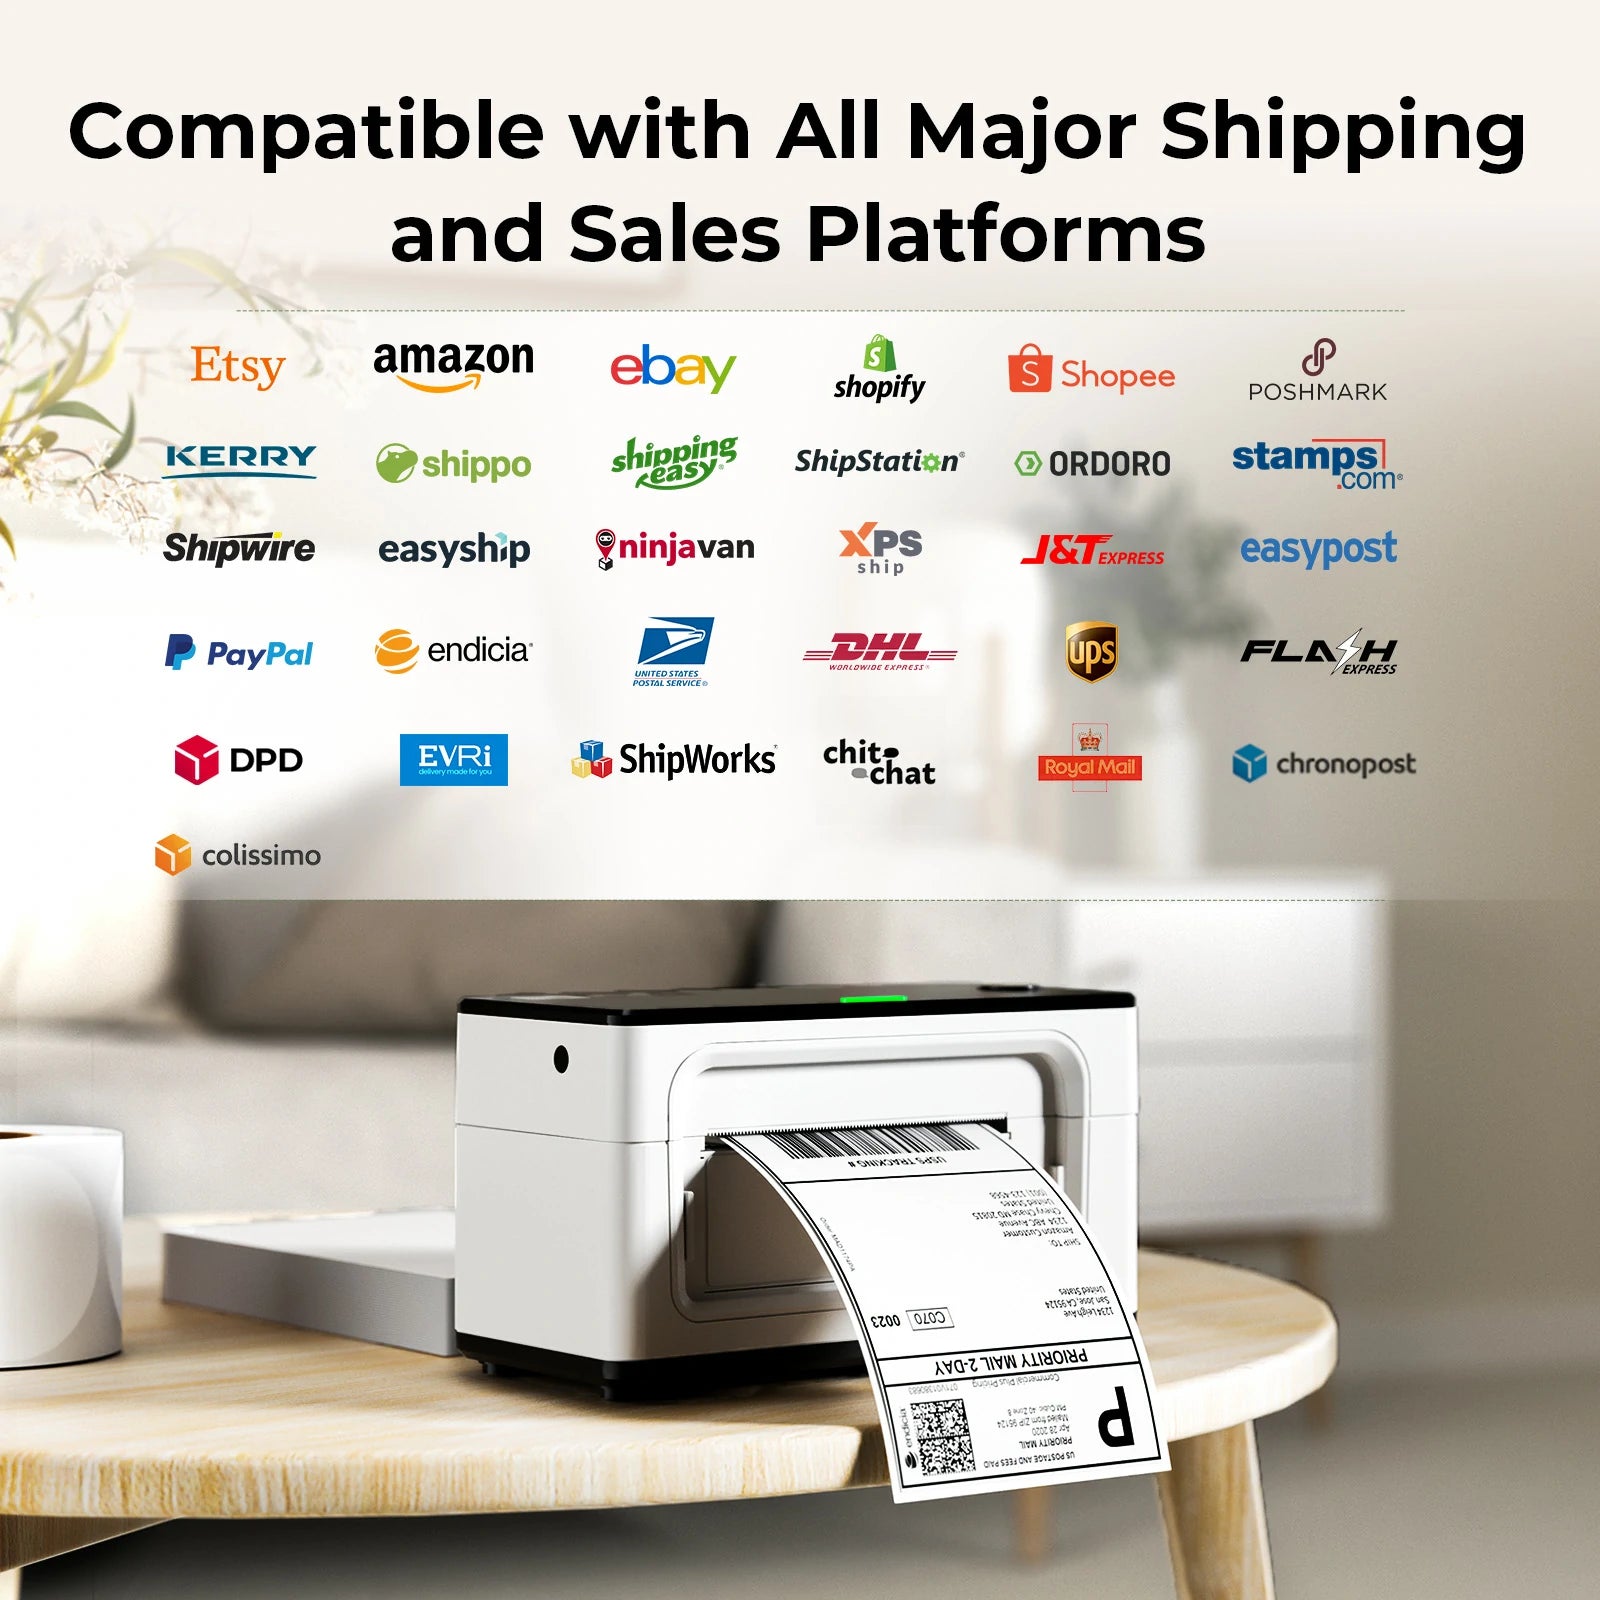 MUNBYN P941B wireless label printer is compatible with various selling and shipping platforms, such as Shopify, Etsy, Amazon, eBay, USPS, and FedEx.